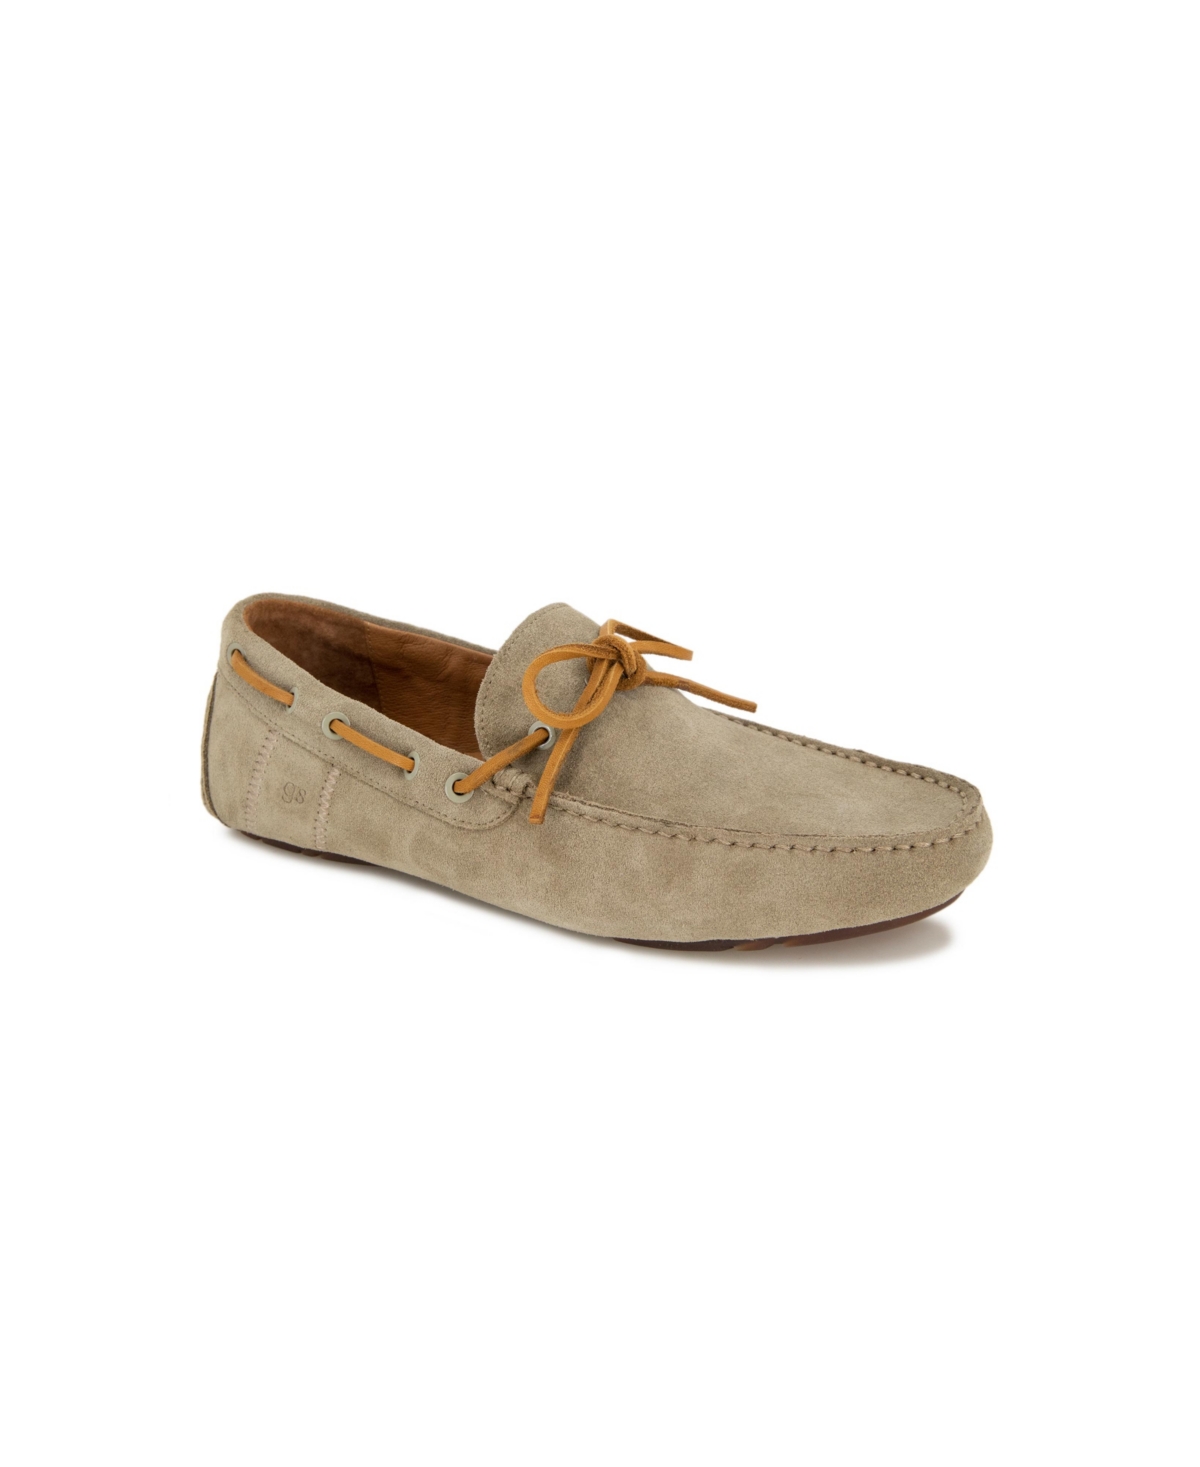 Men's Nyle Driver Boat Slip-On Shoes - Taupe Suede